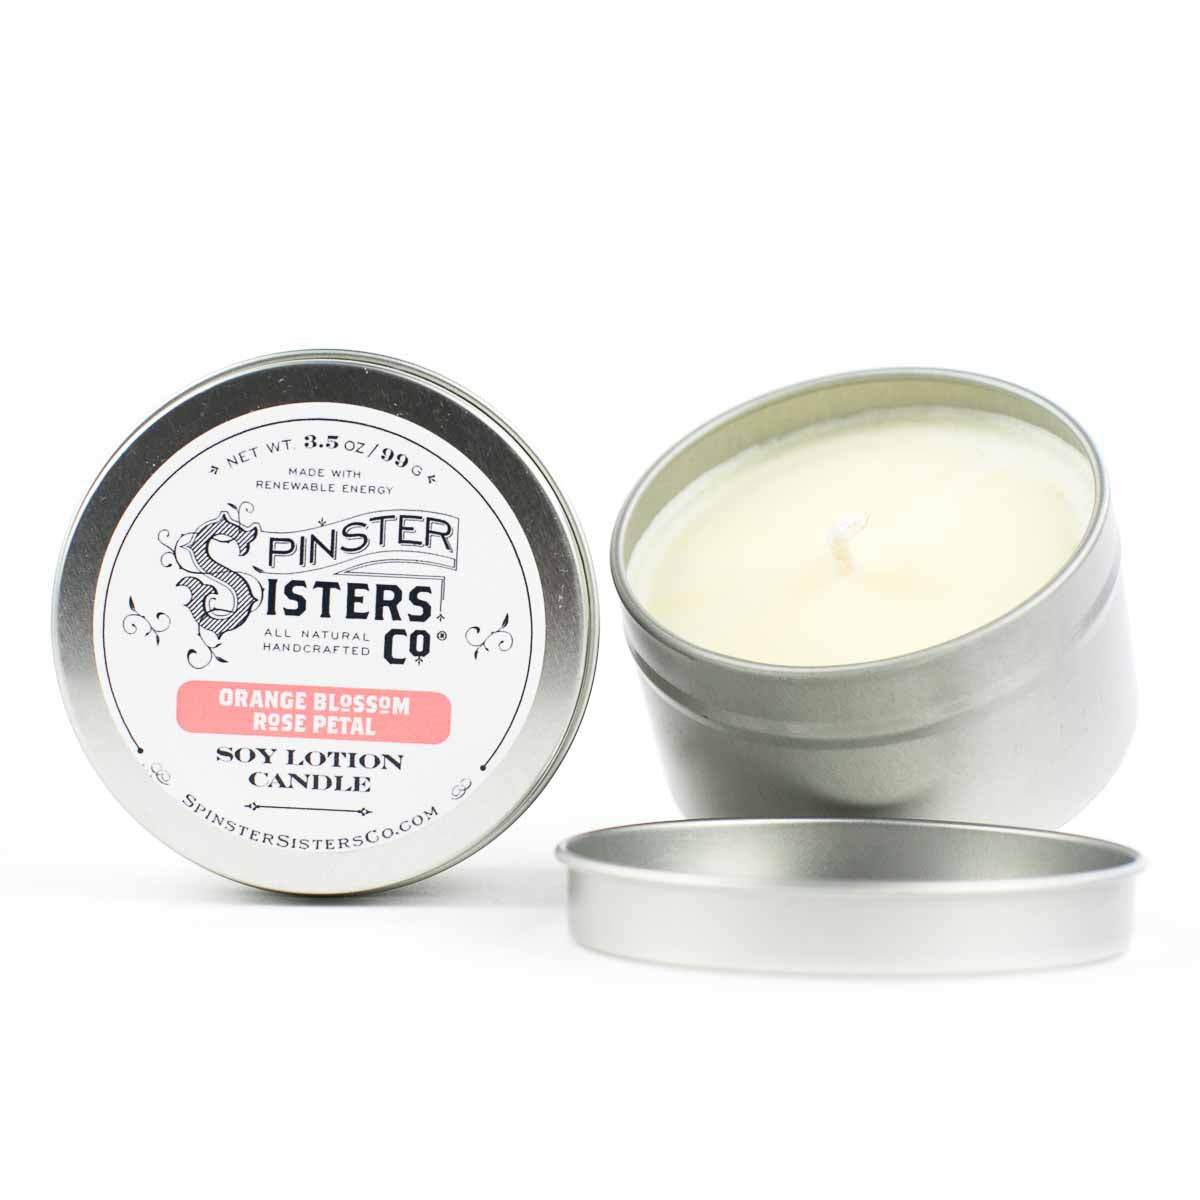 Spinster Sisters Soy Lotion Candle - Orange Blossom & Rose Petal